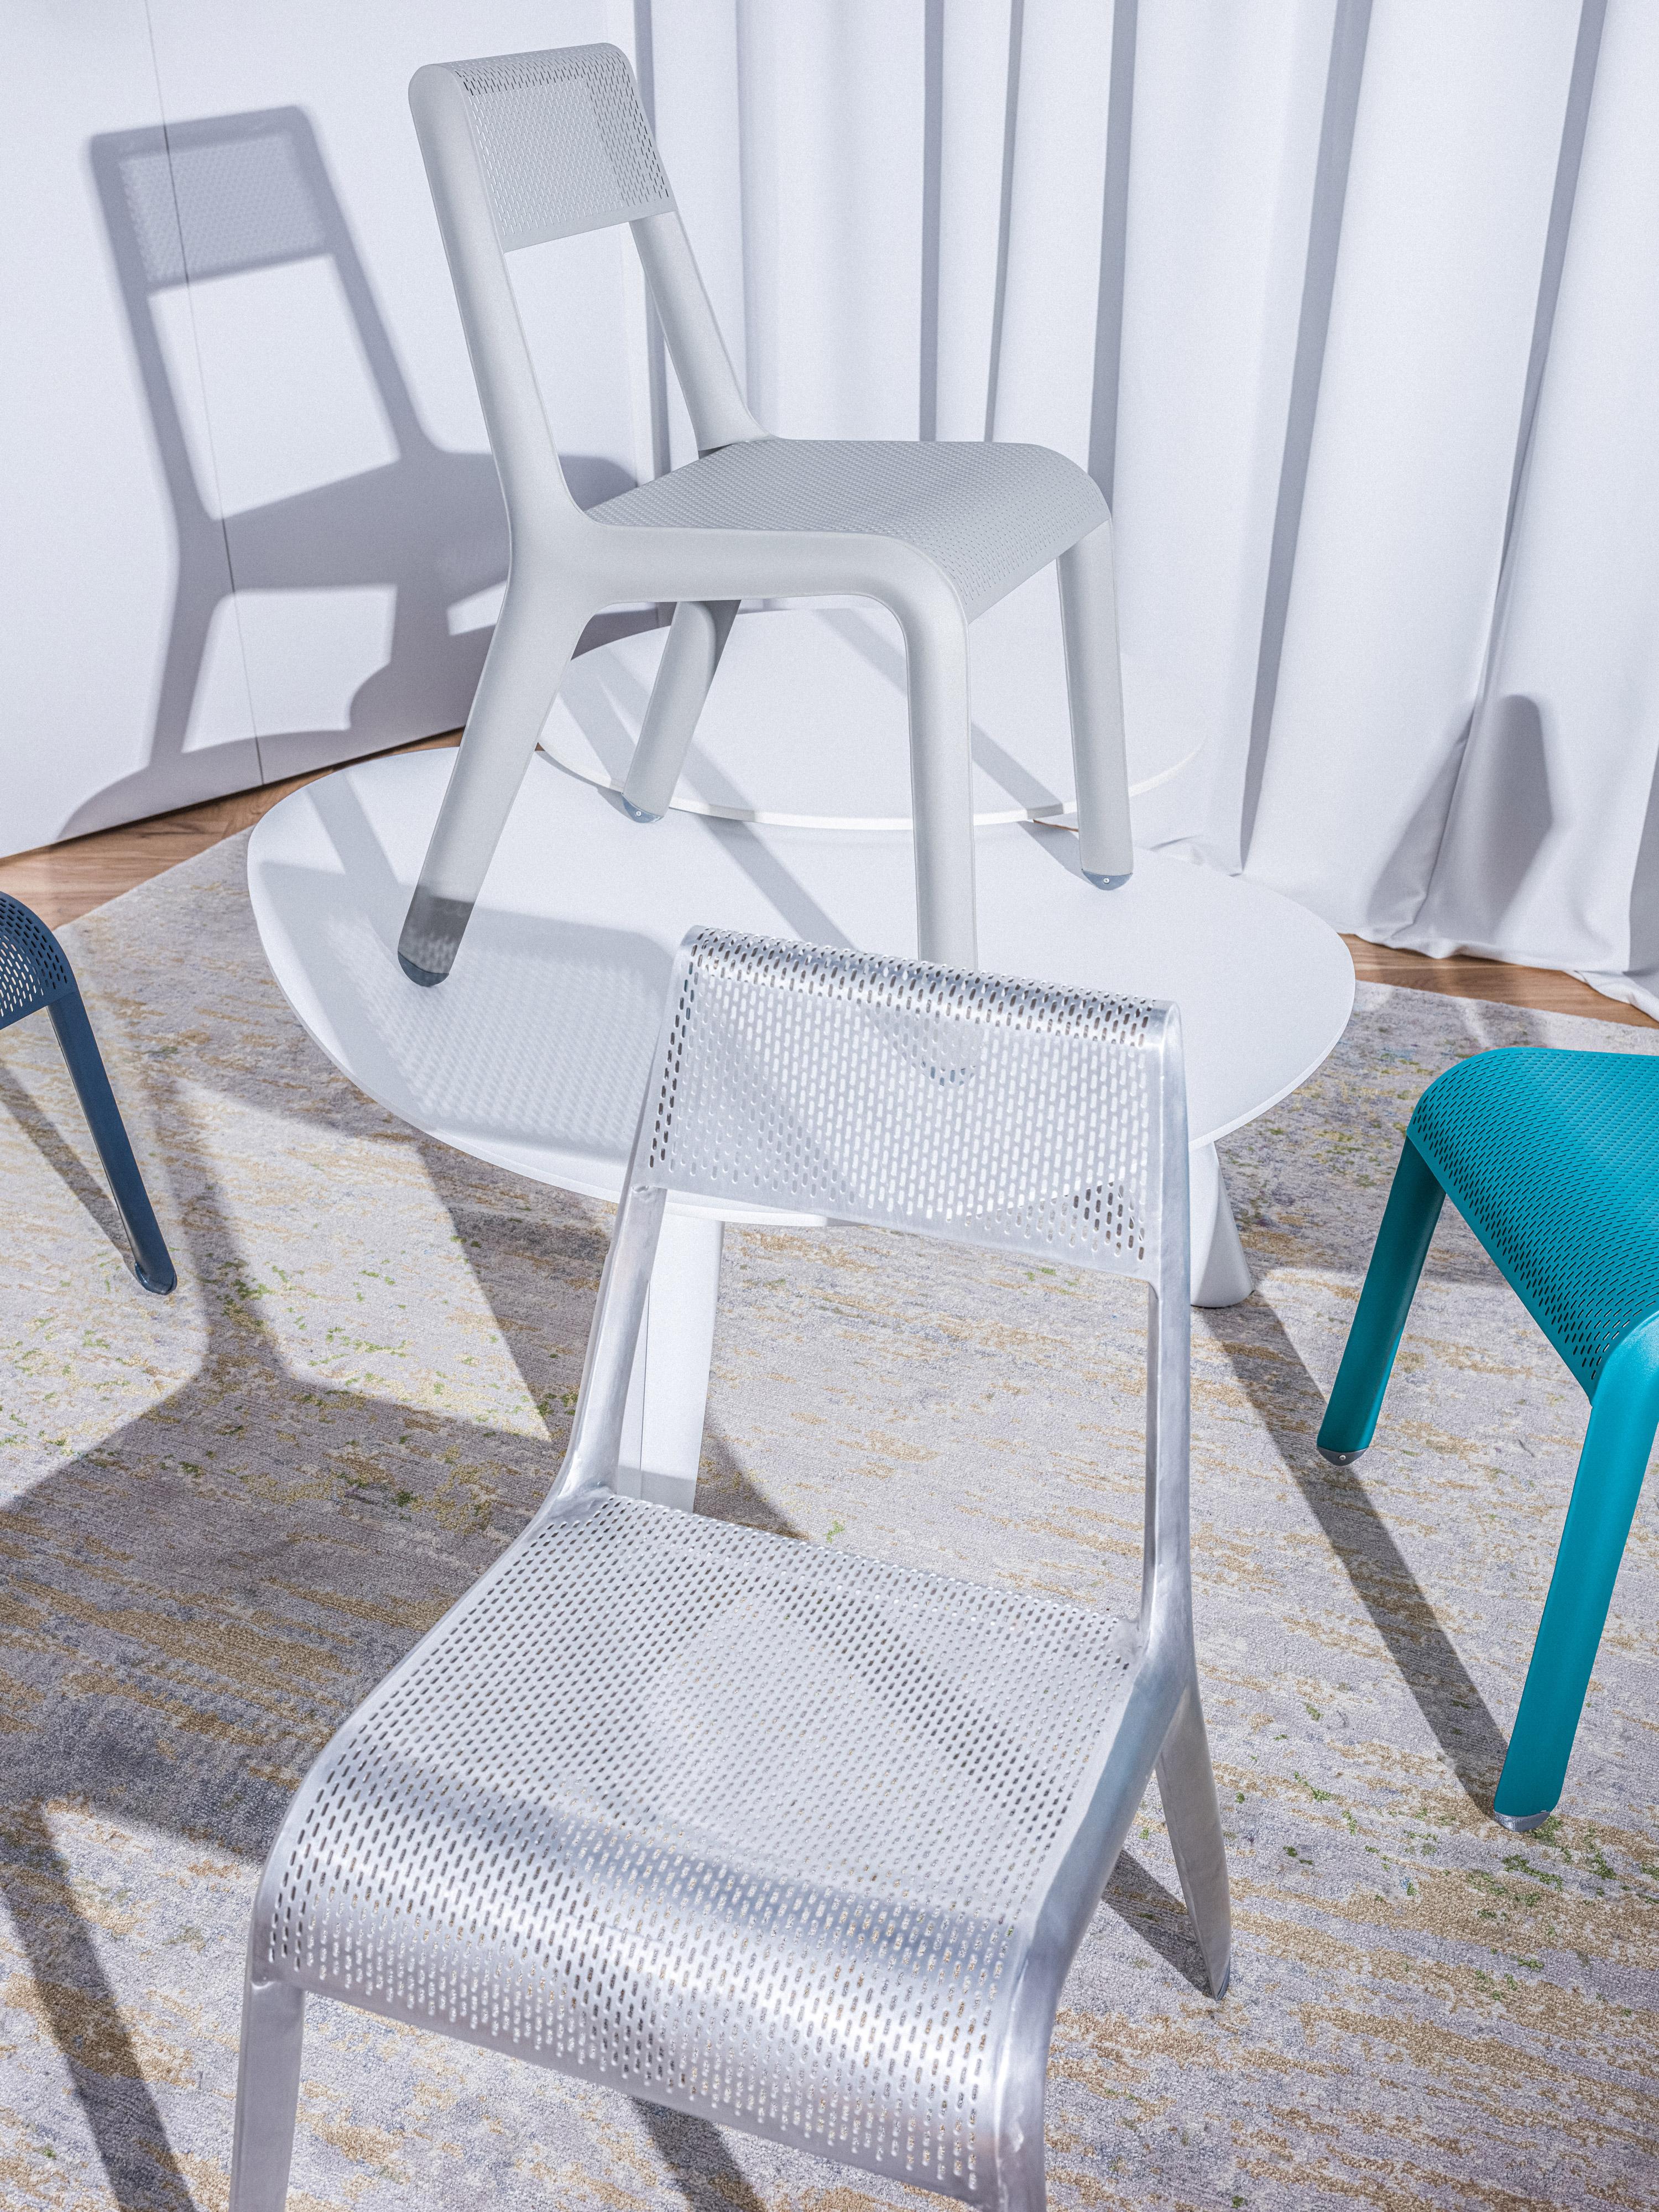 Leggera design fits perfectly the current trends and consumers’ expectations, especially in terms of environment friendly solutions. Pursuant to MMT idea (Mono Material Thinking), the chair is made of just one material, aluminum, what allows to